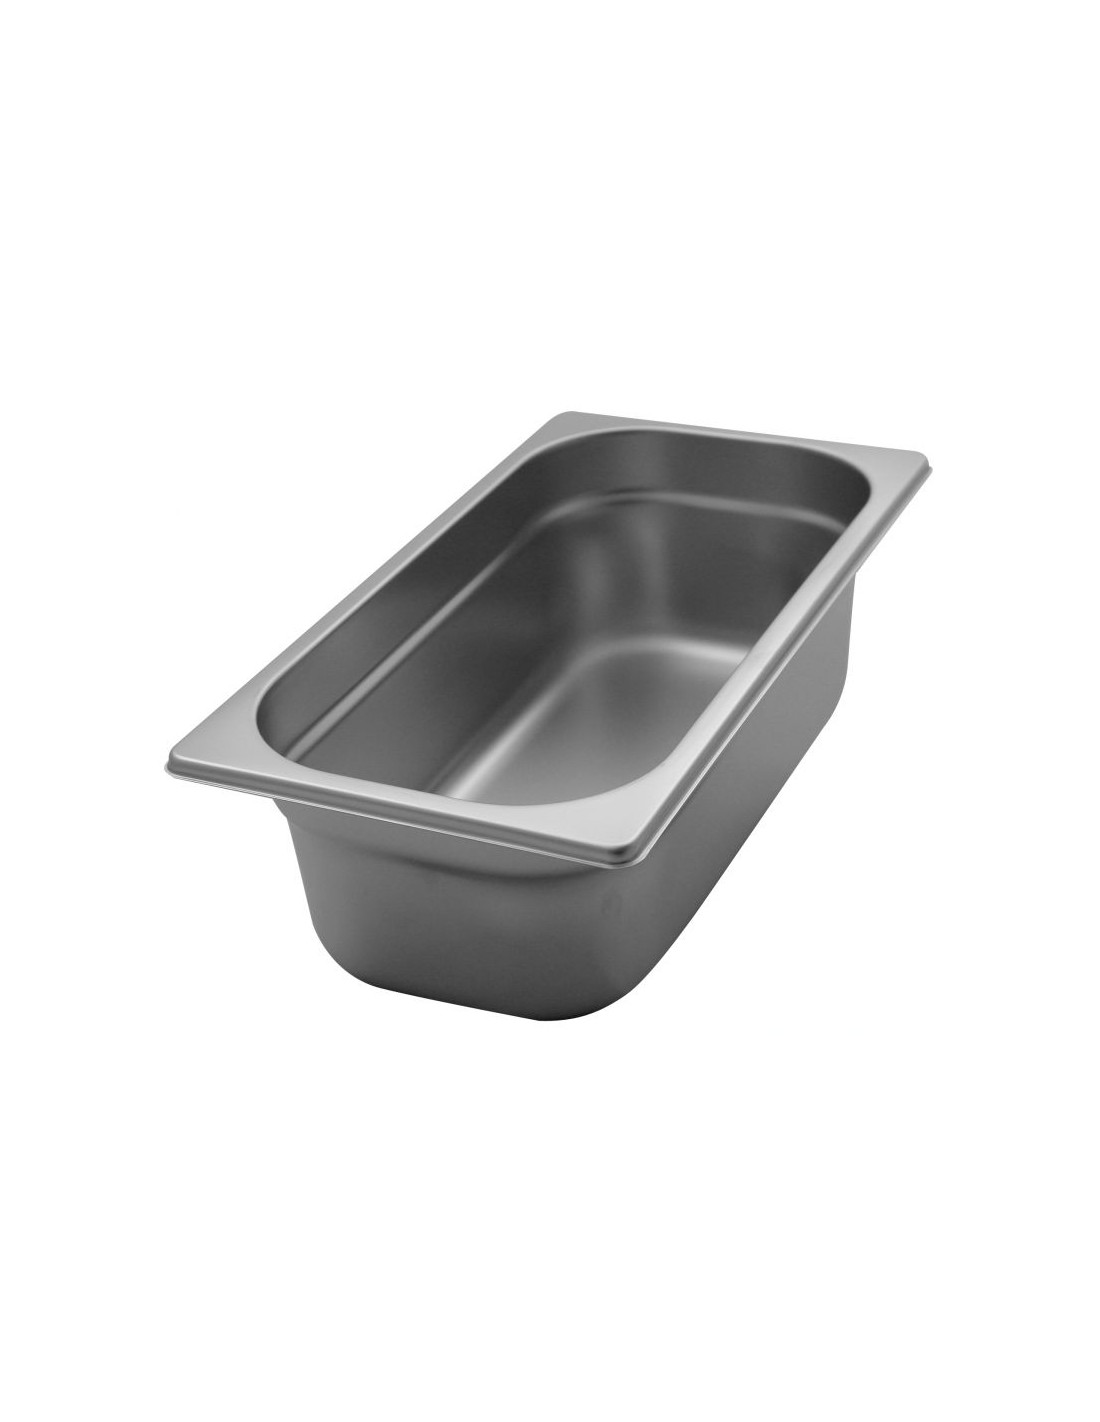 Stainless steel gastronorm containers 1/3 H. 10 cm - Capacity 3.8 liters - Dimensions 32.5 x 17.6 cm